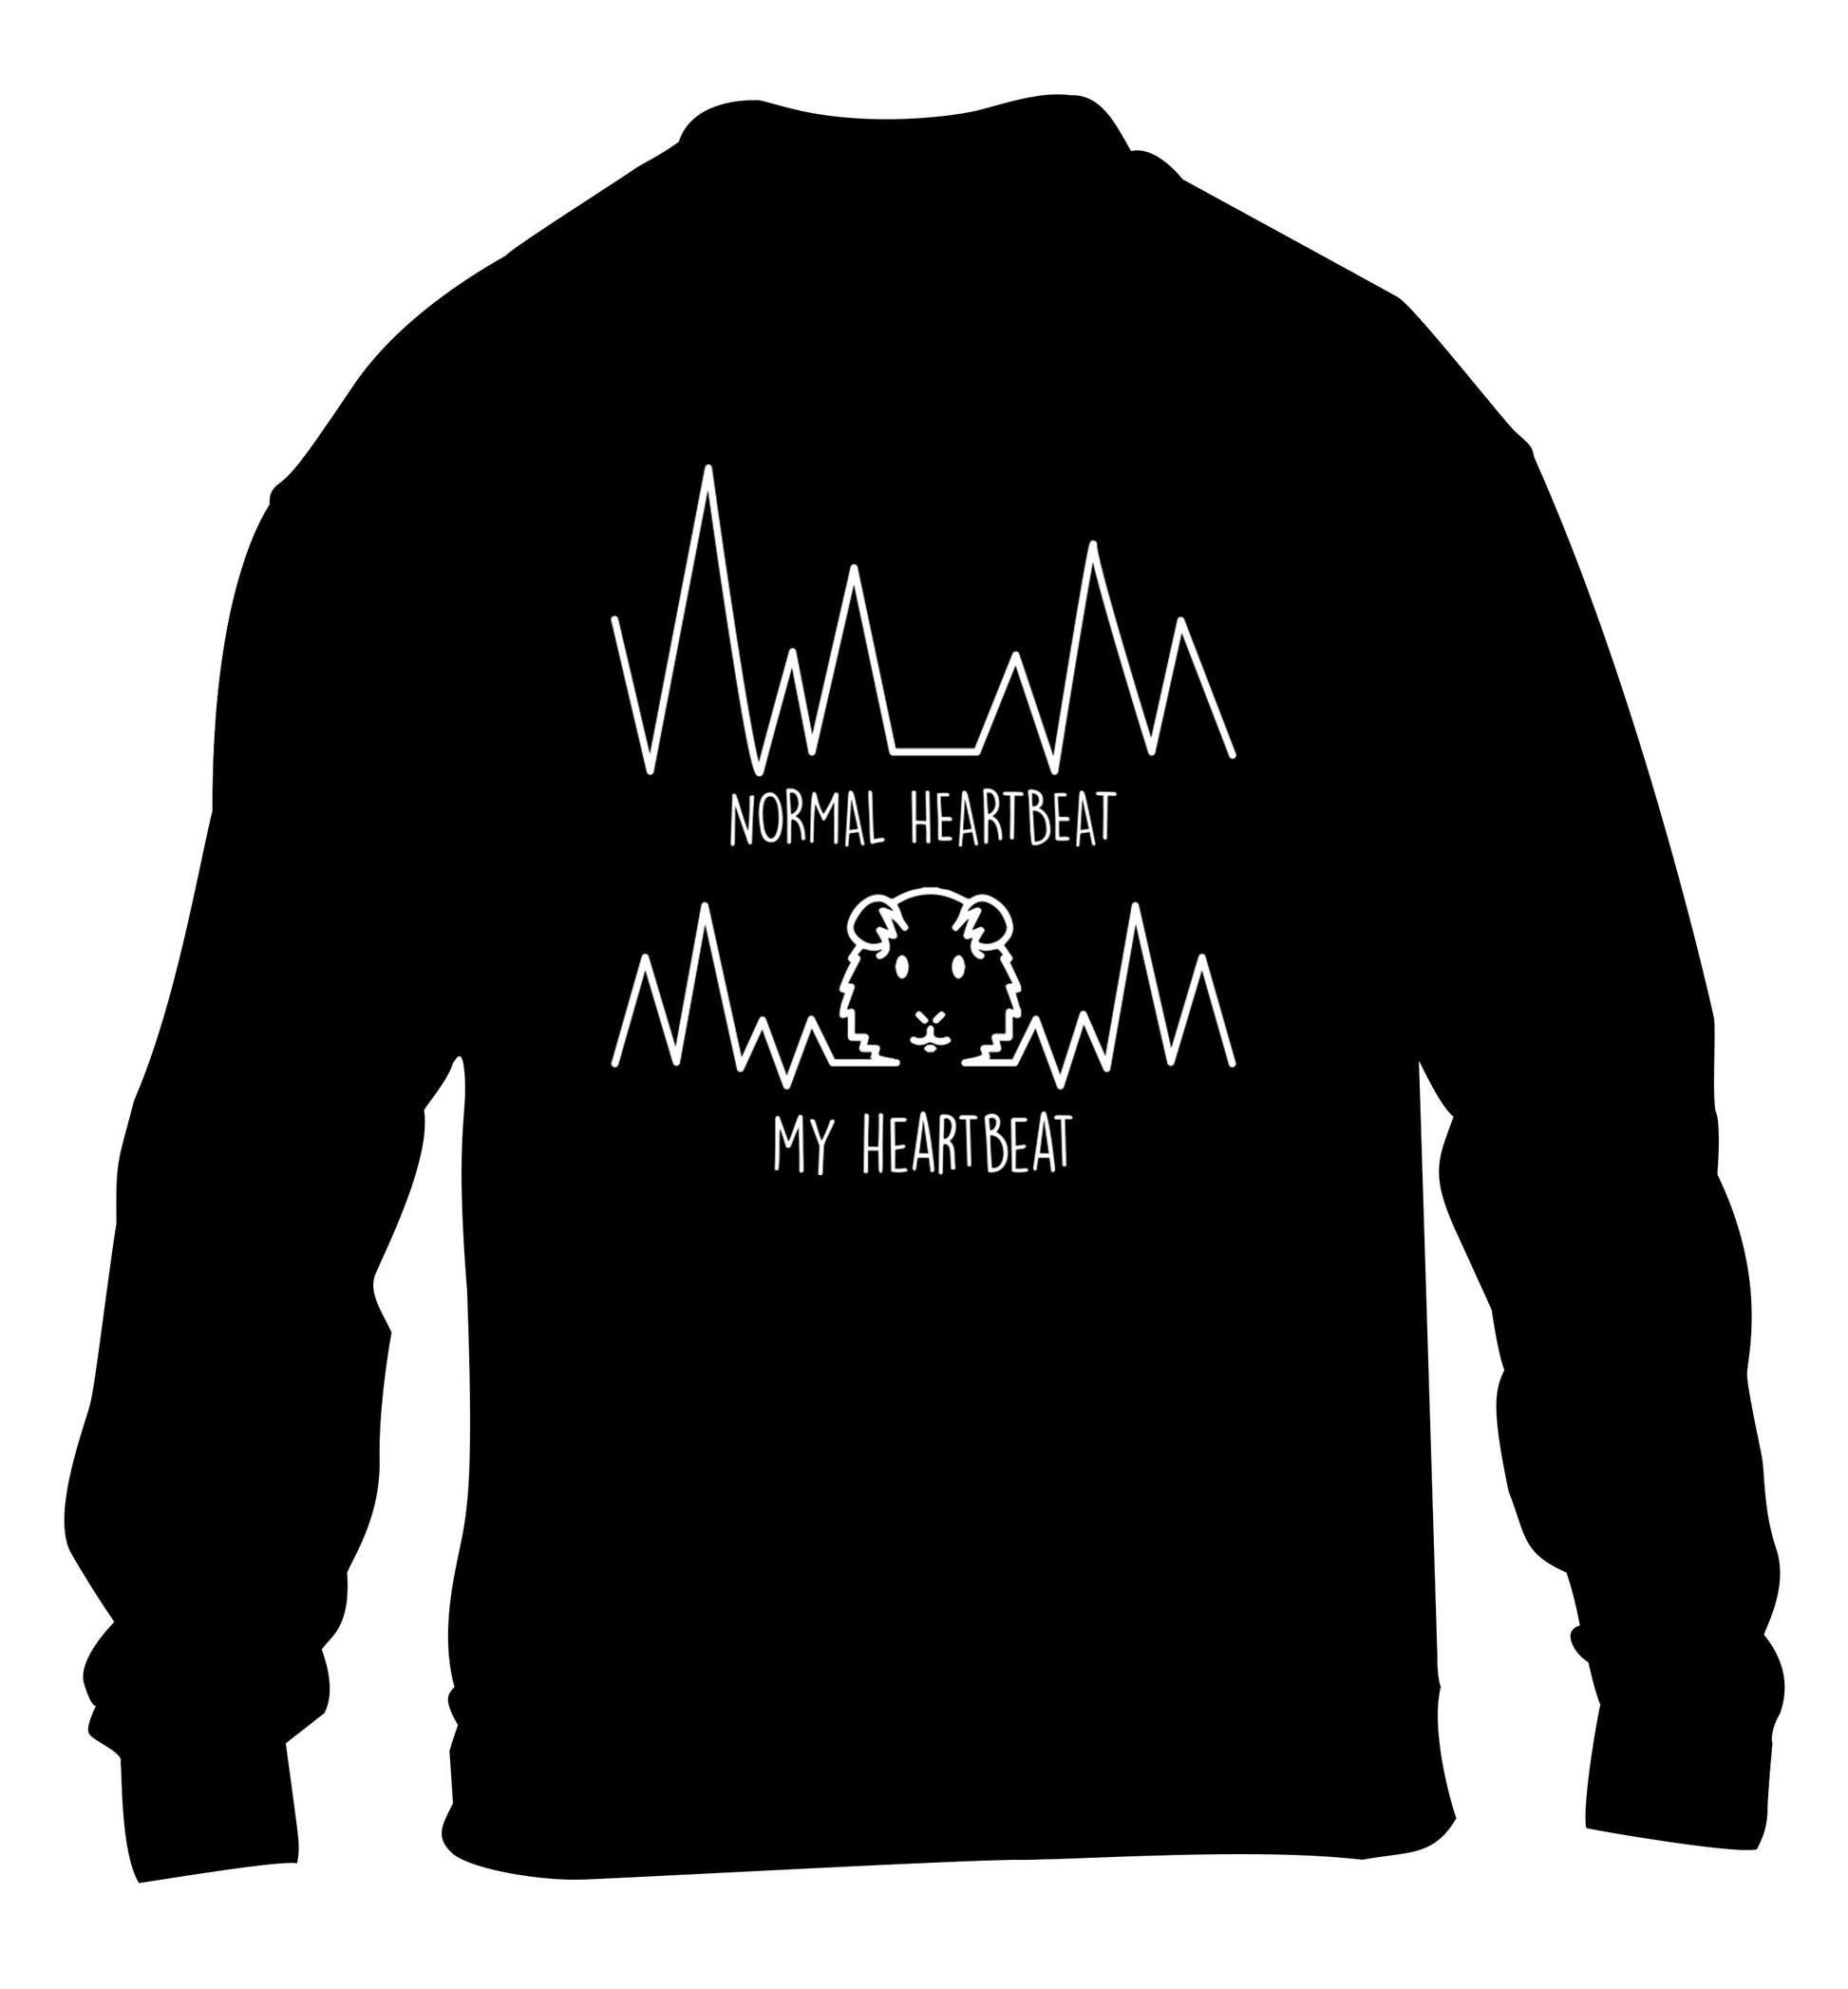 Normal heartbeat vs my heartbeat guinea pig lover children's black  sweater 12-14 Years